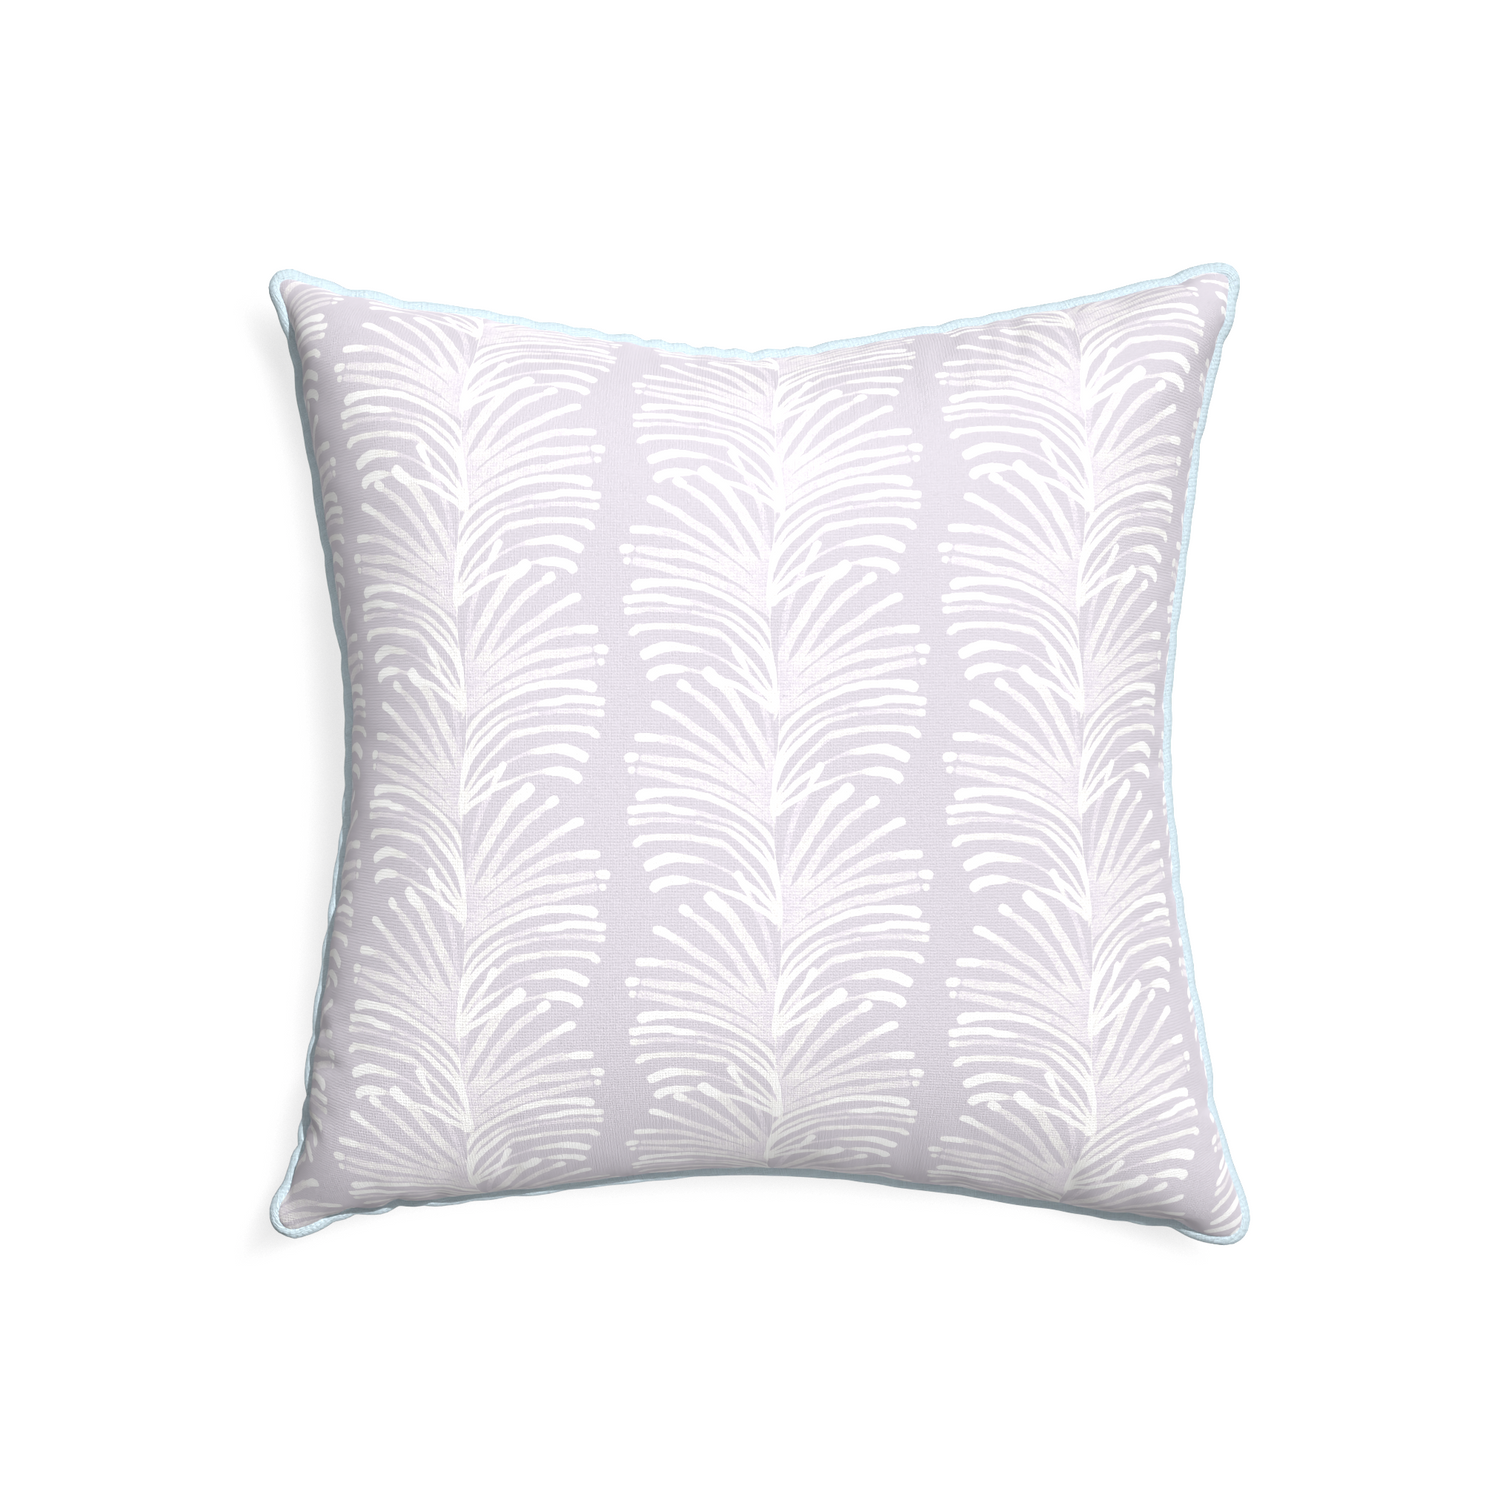 22-square emma lavender custom pillow with powder piping on white background